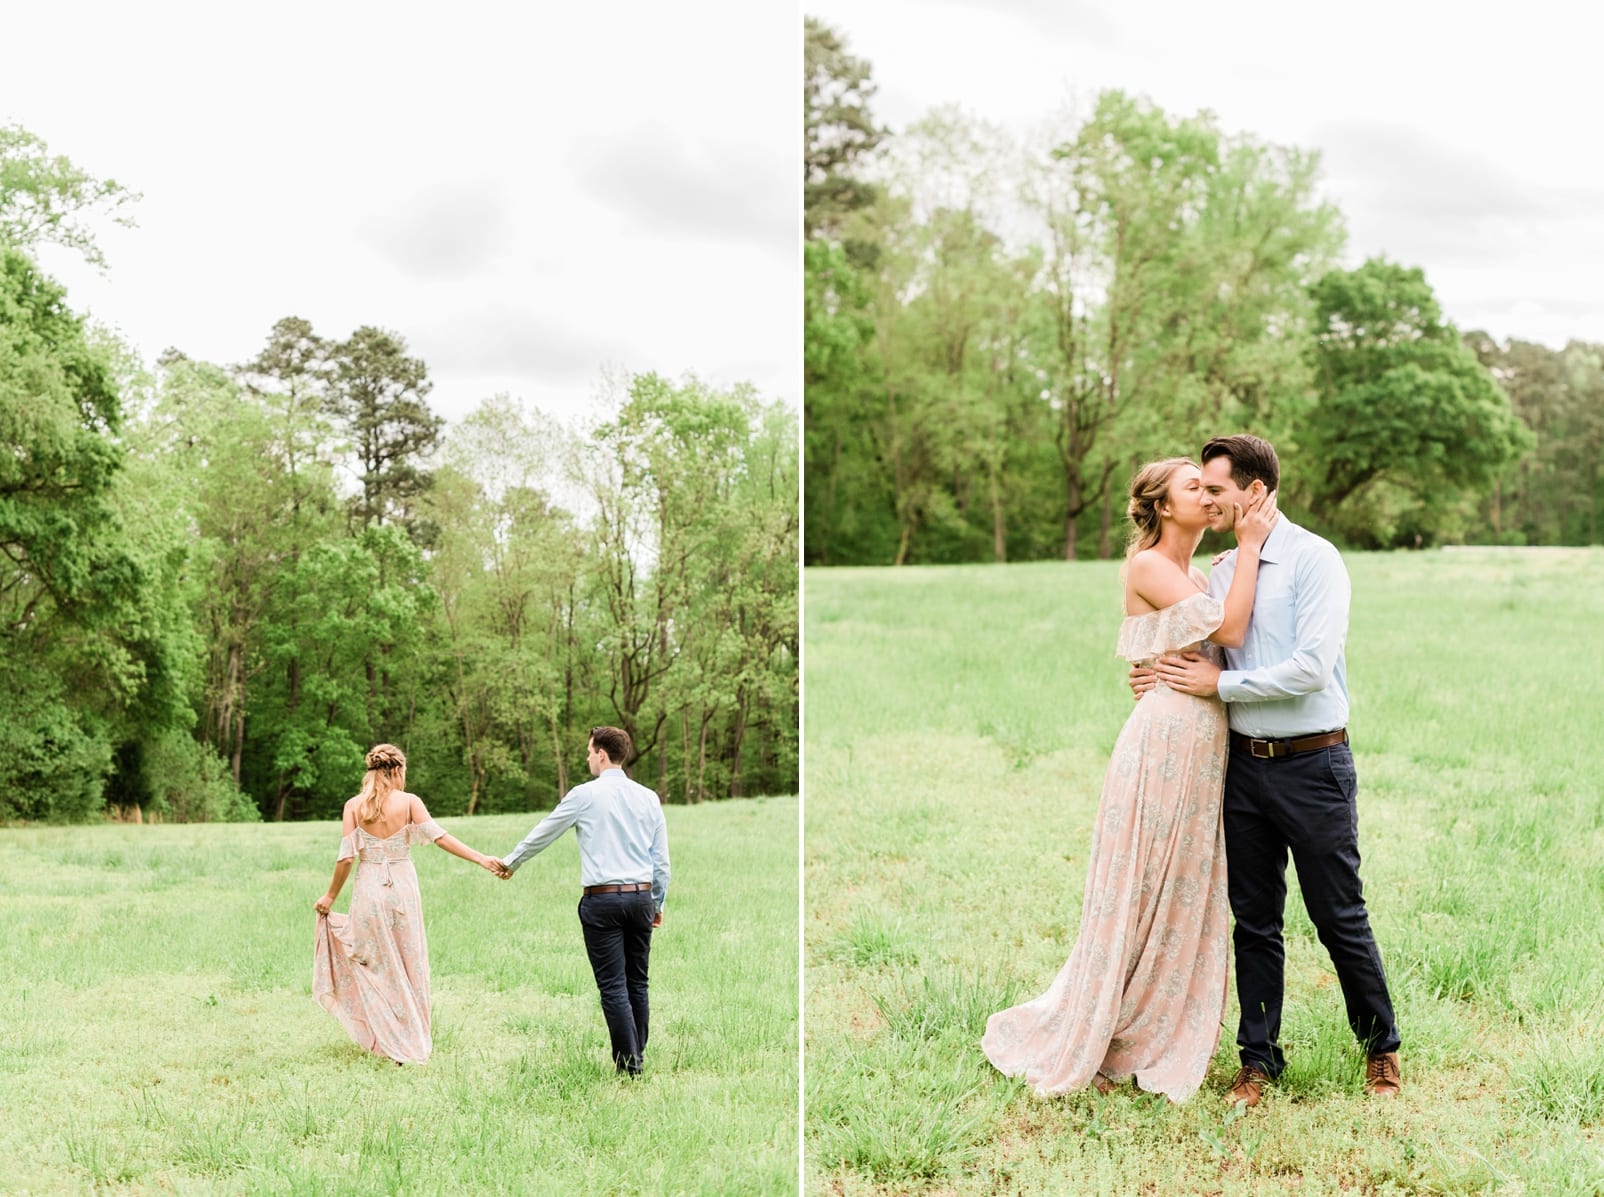 Wake Forest engagement session with the bride leading the groom through a grass field photo